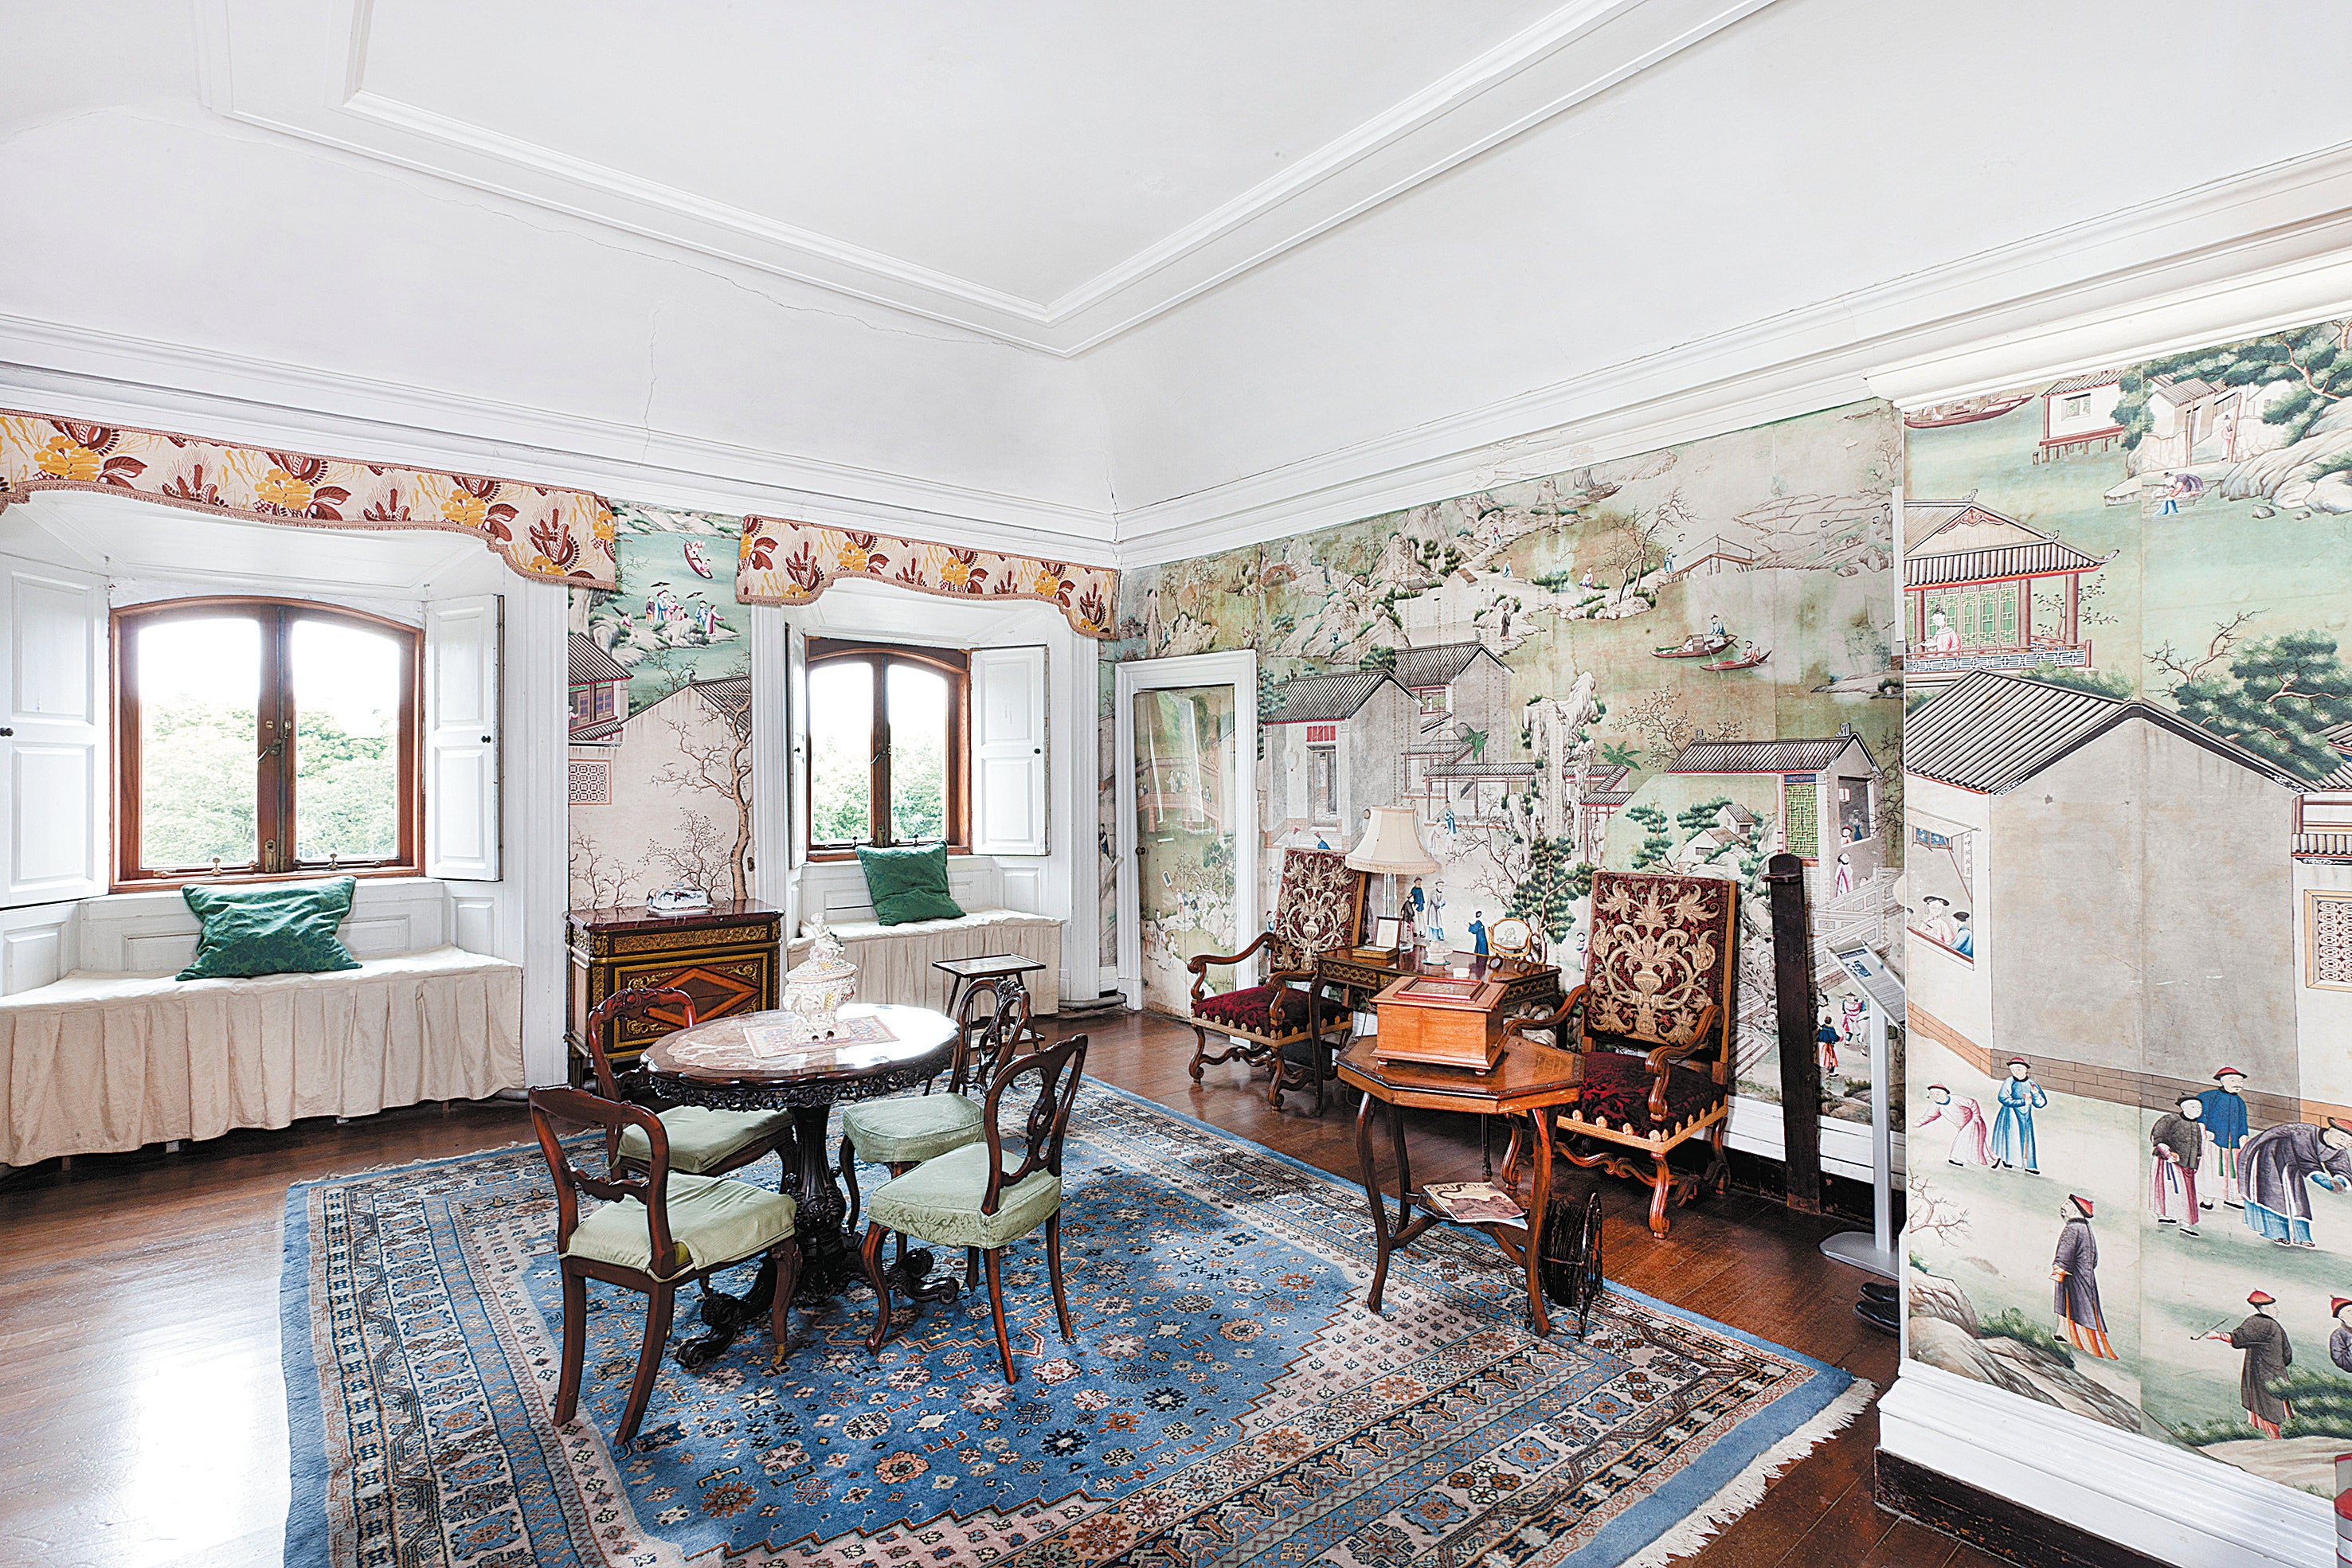 One of Westport House’s most famous features is the Chinese room, with 200-year-old hand-painted wallpaper covering it as one continuous piece of art